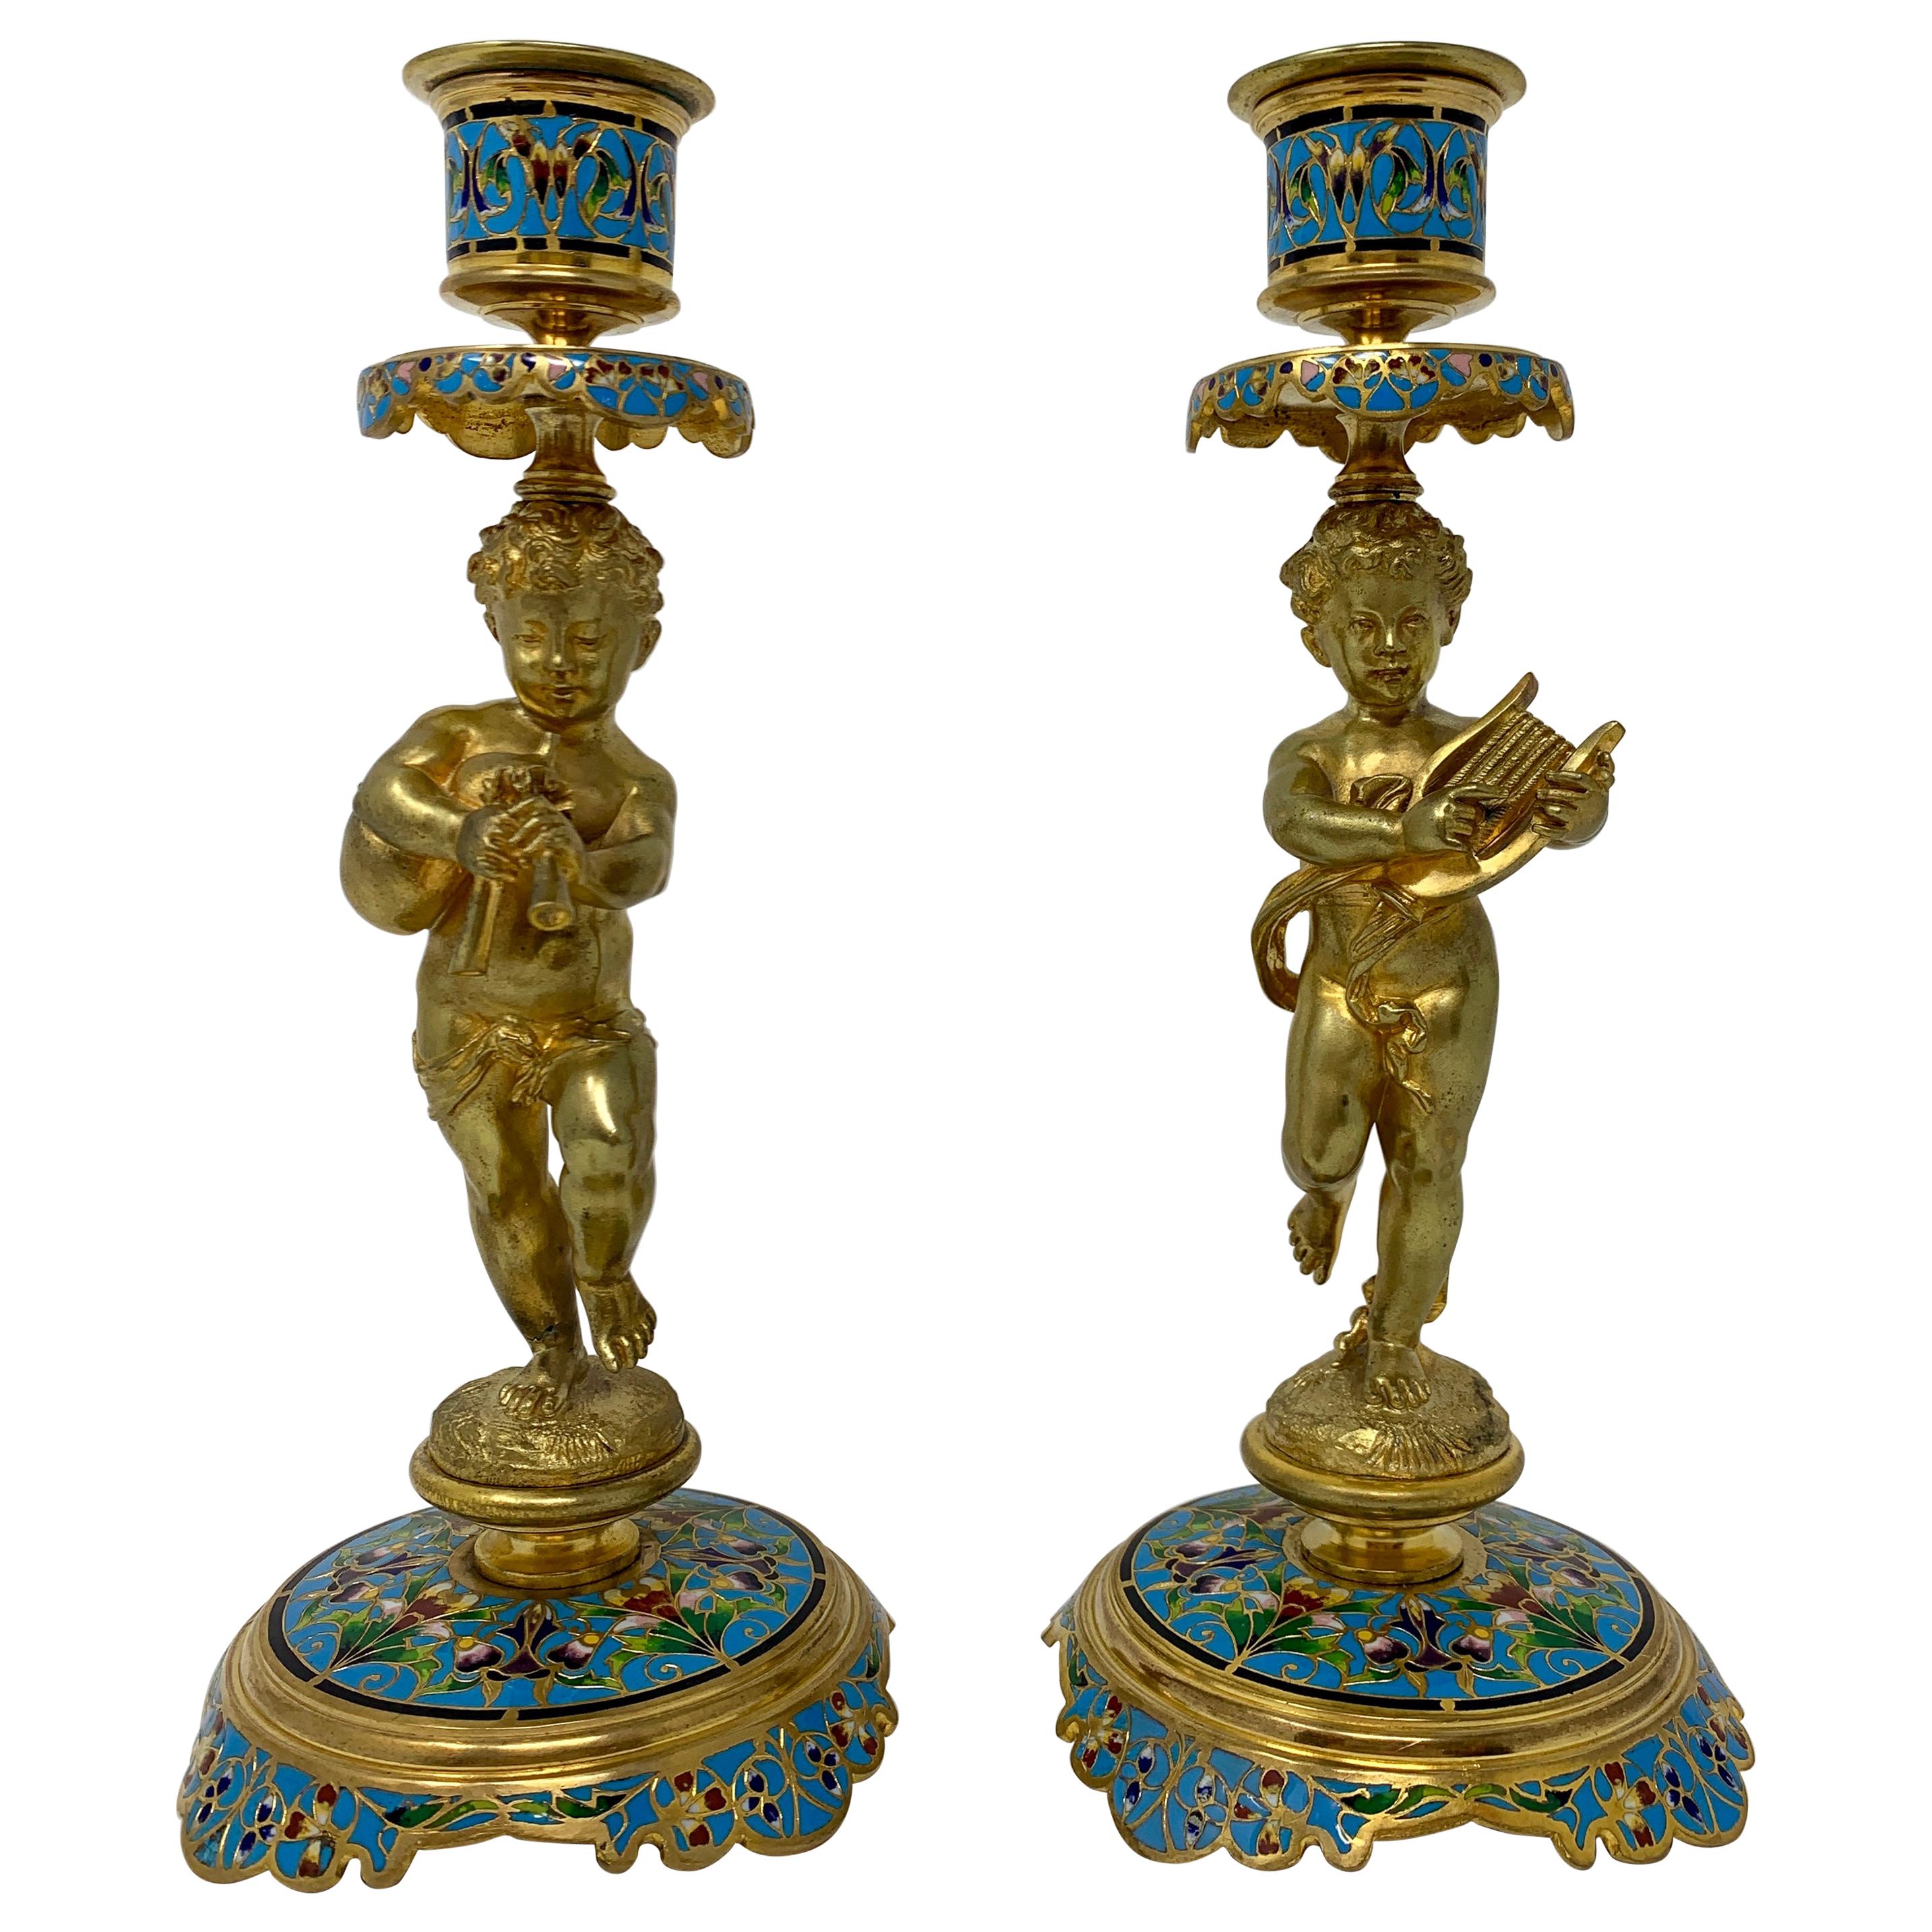 Pair of Antique French Cloisonné and Gold Bronze Candlesticks For Sale